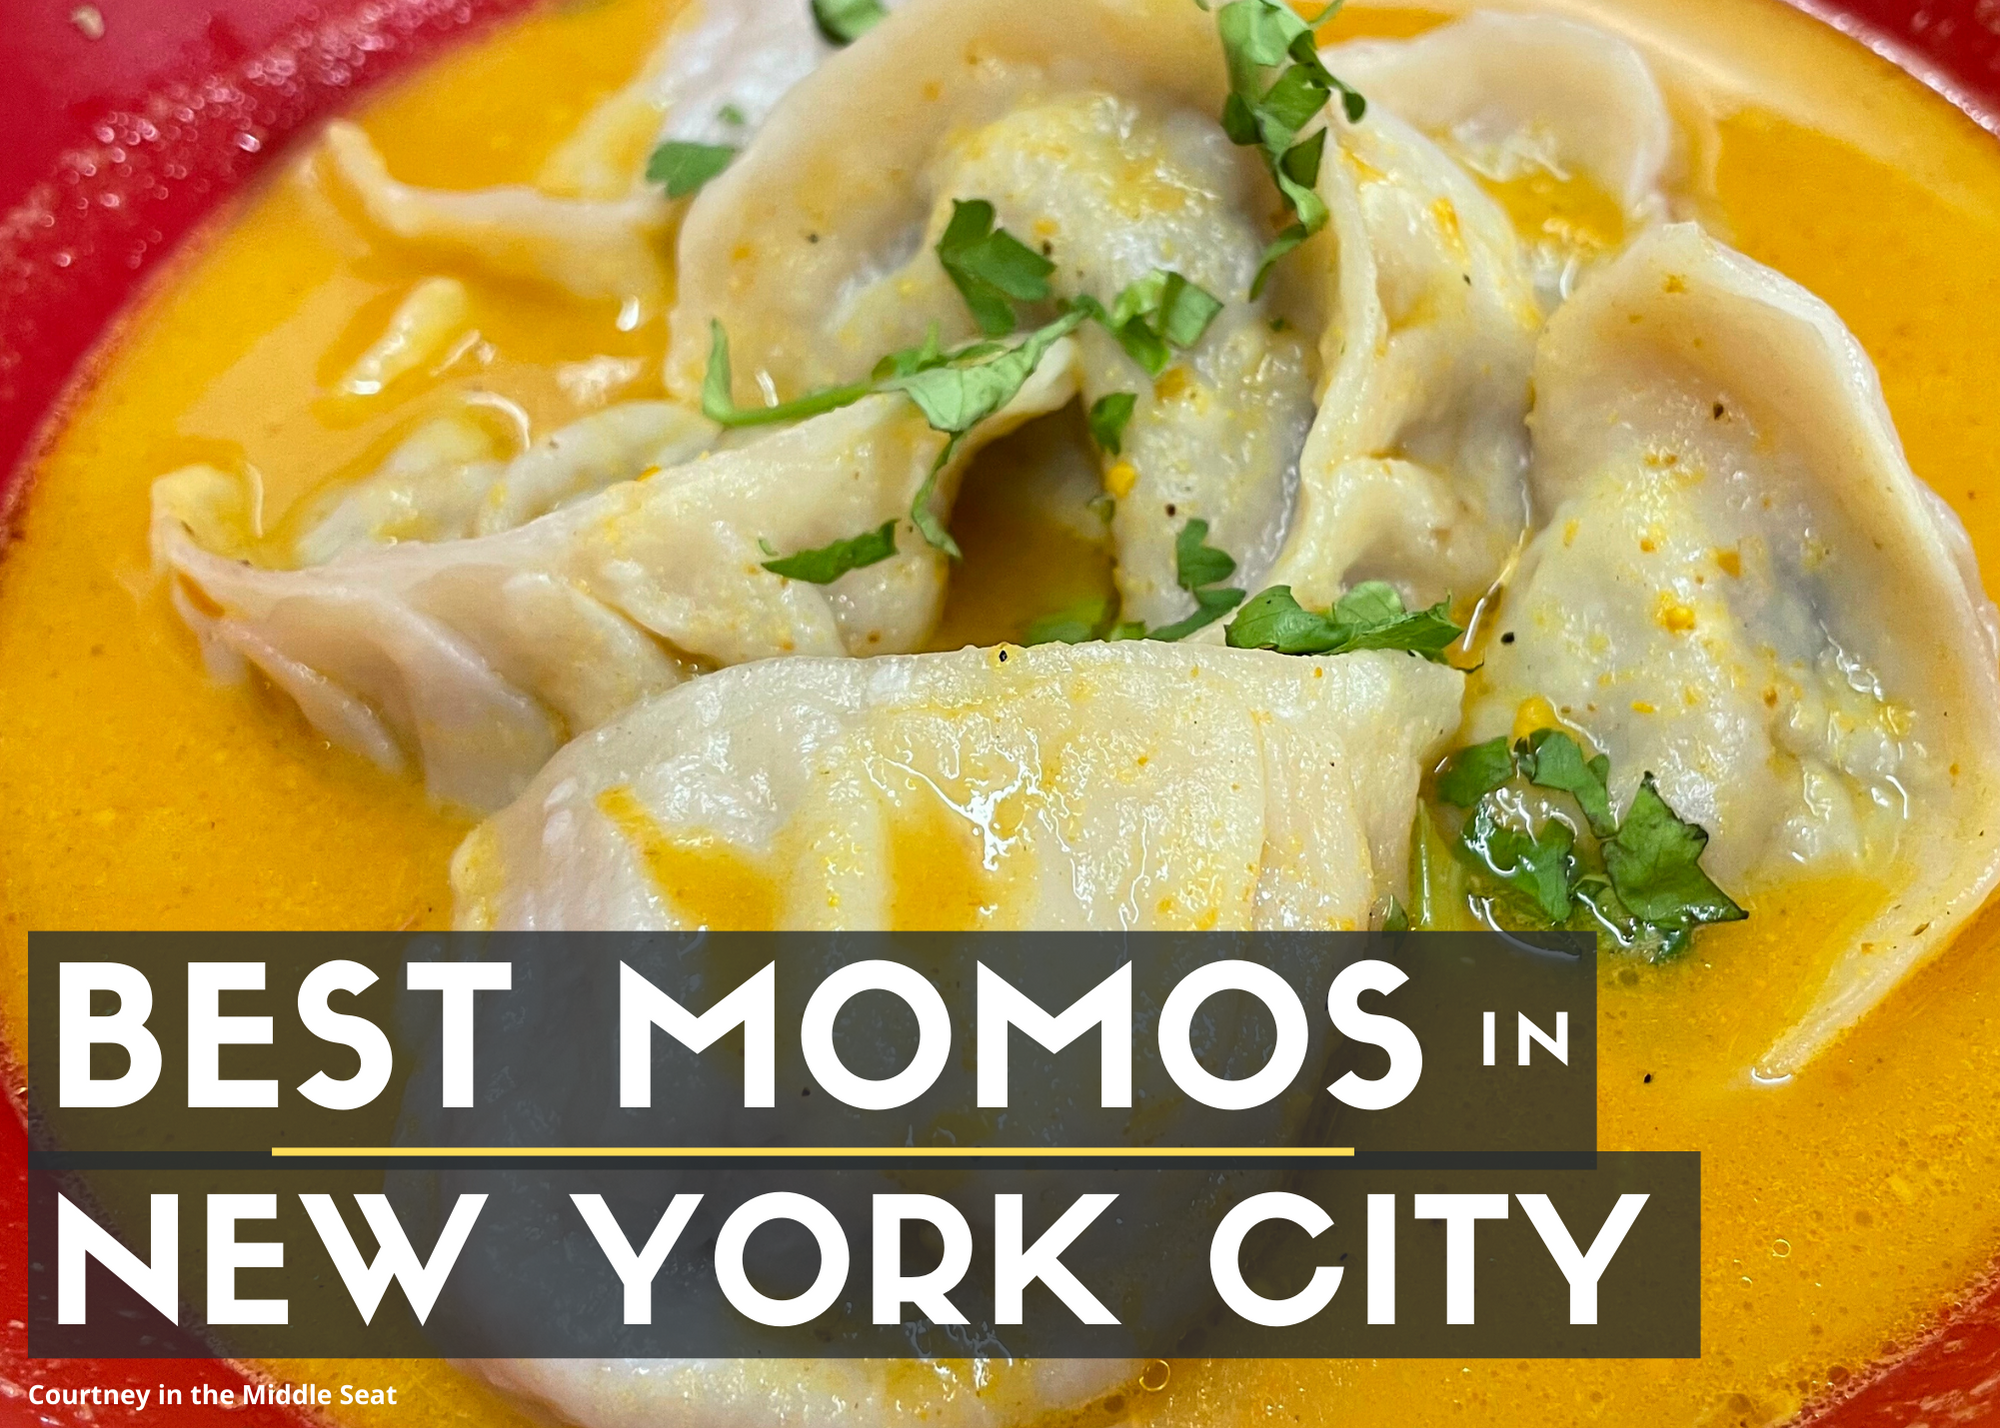 Blog Post Cover for Best Momos in New York City picturing beef momos in jhol